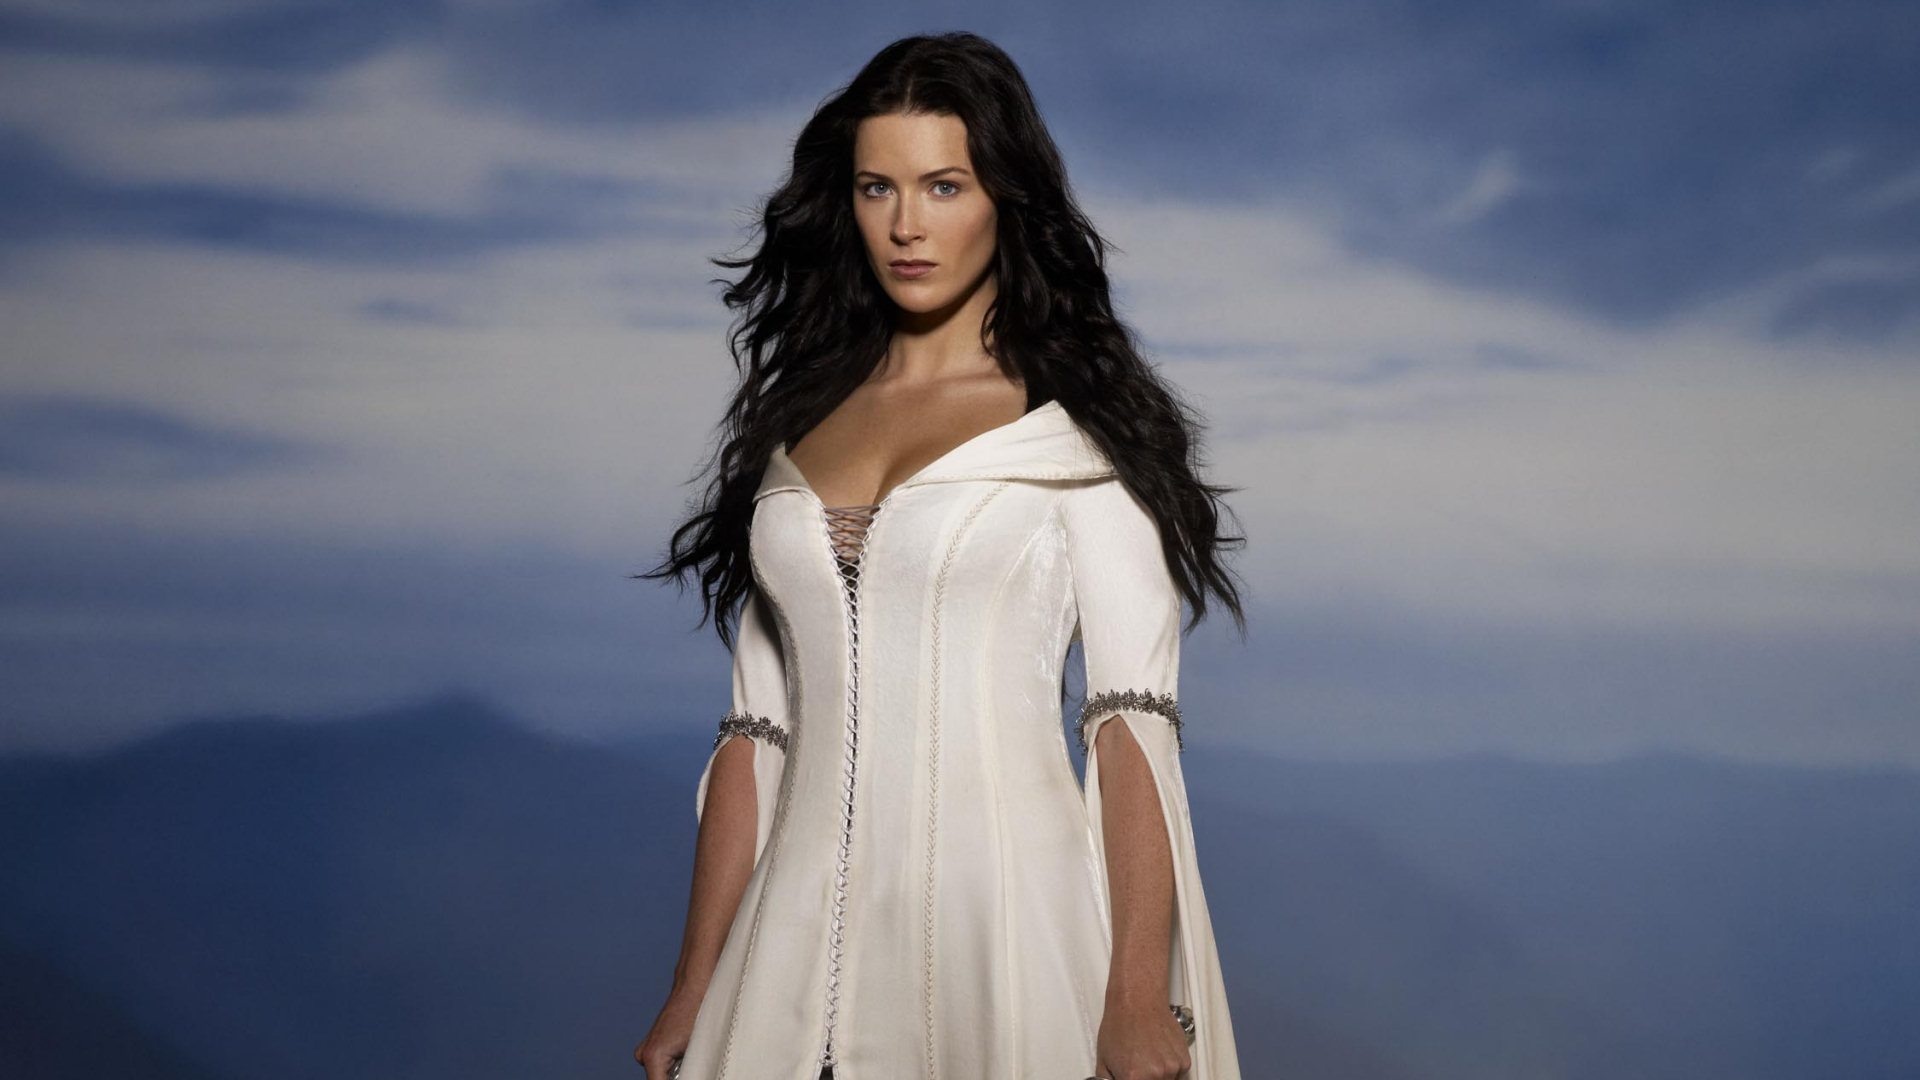 Legend of the Seeker (TV Series): Kahlan Amnell, The Mother Confessor and the last living Confessor. 1920x1080 Full HD Wallpaper.